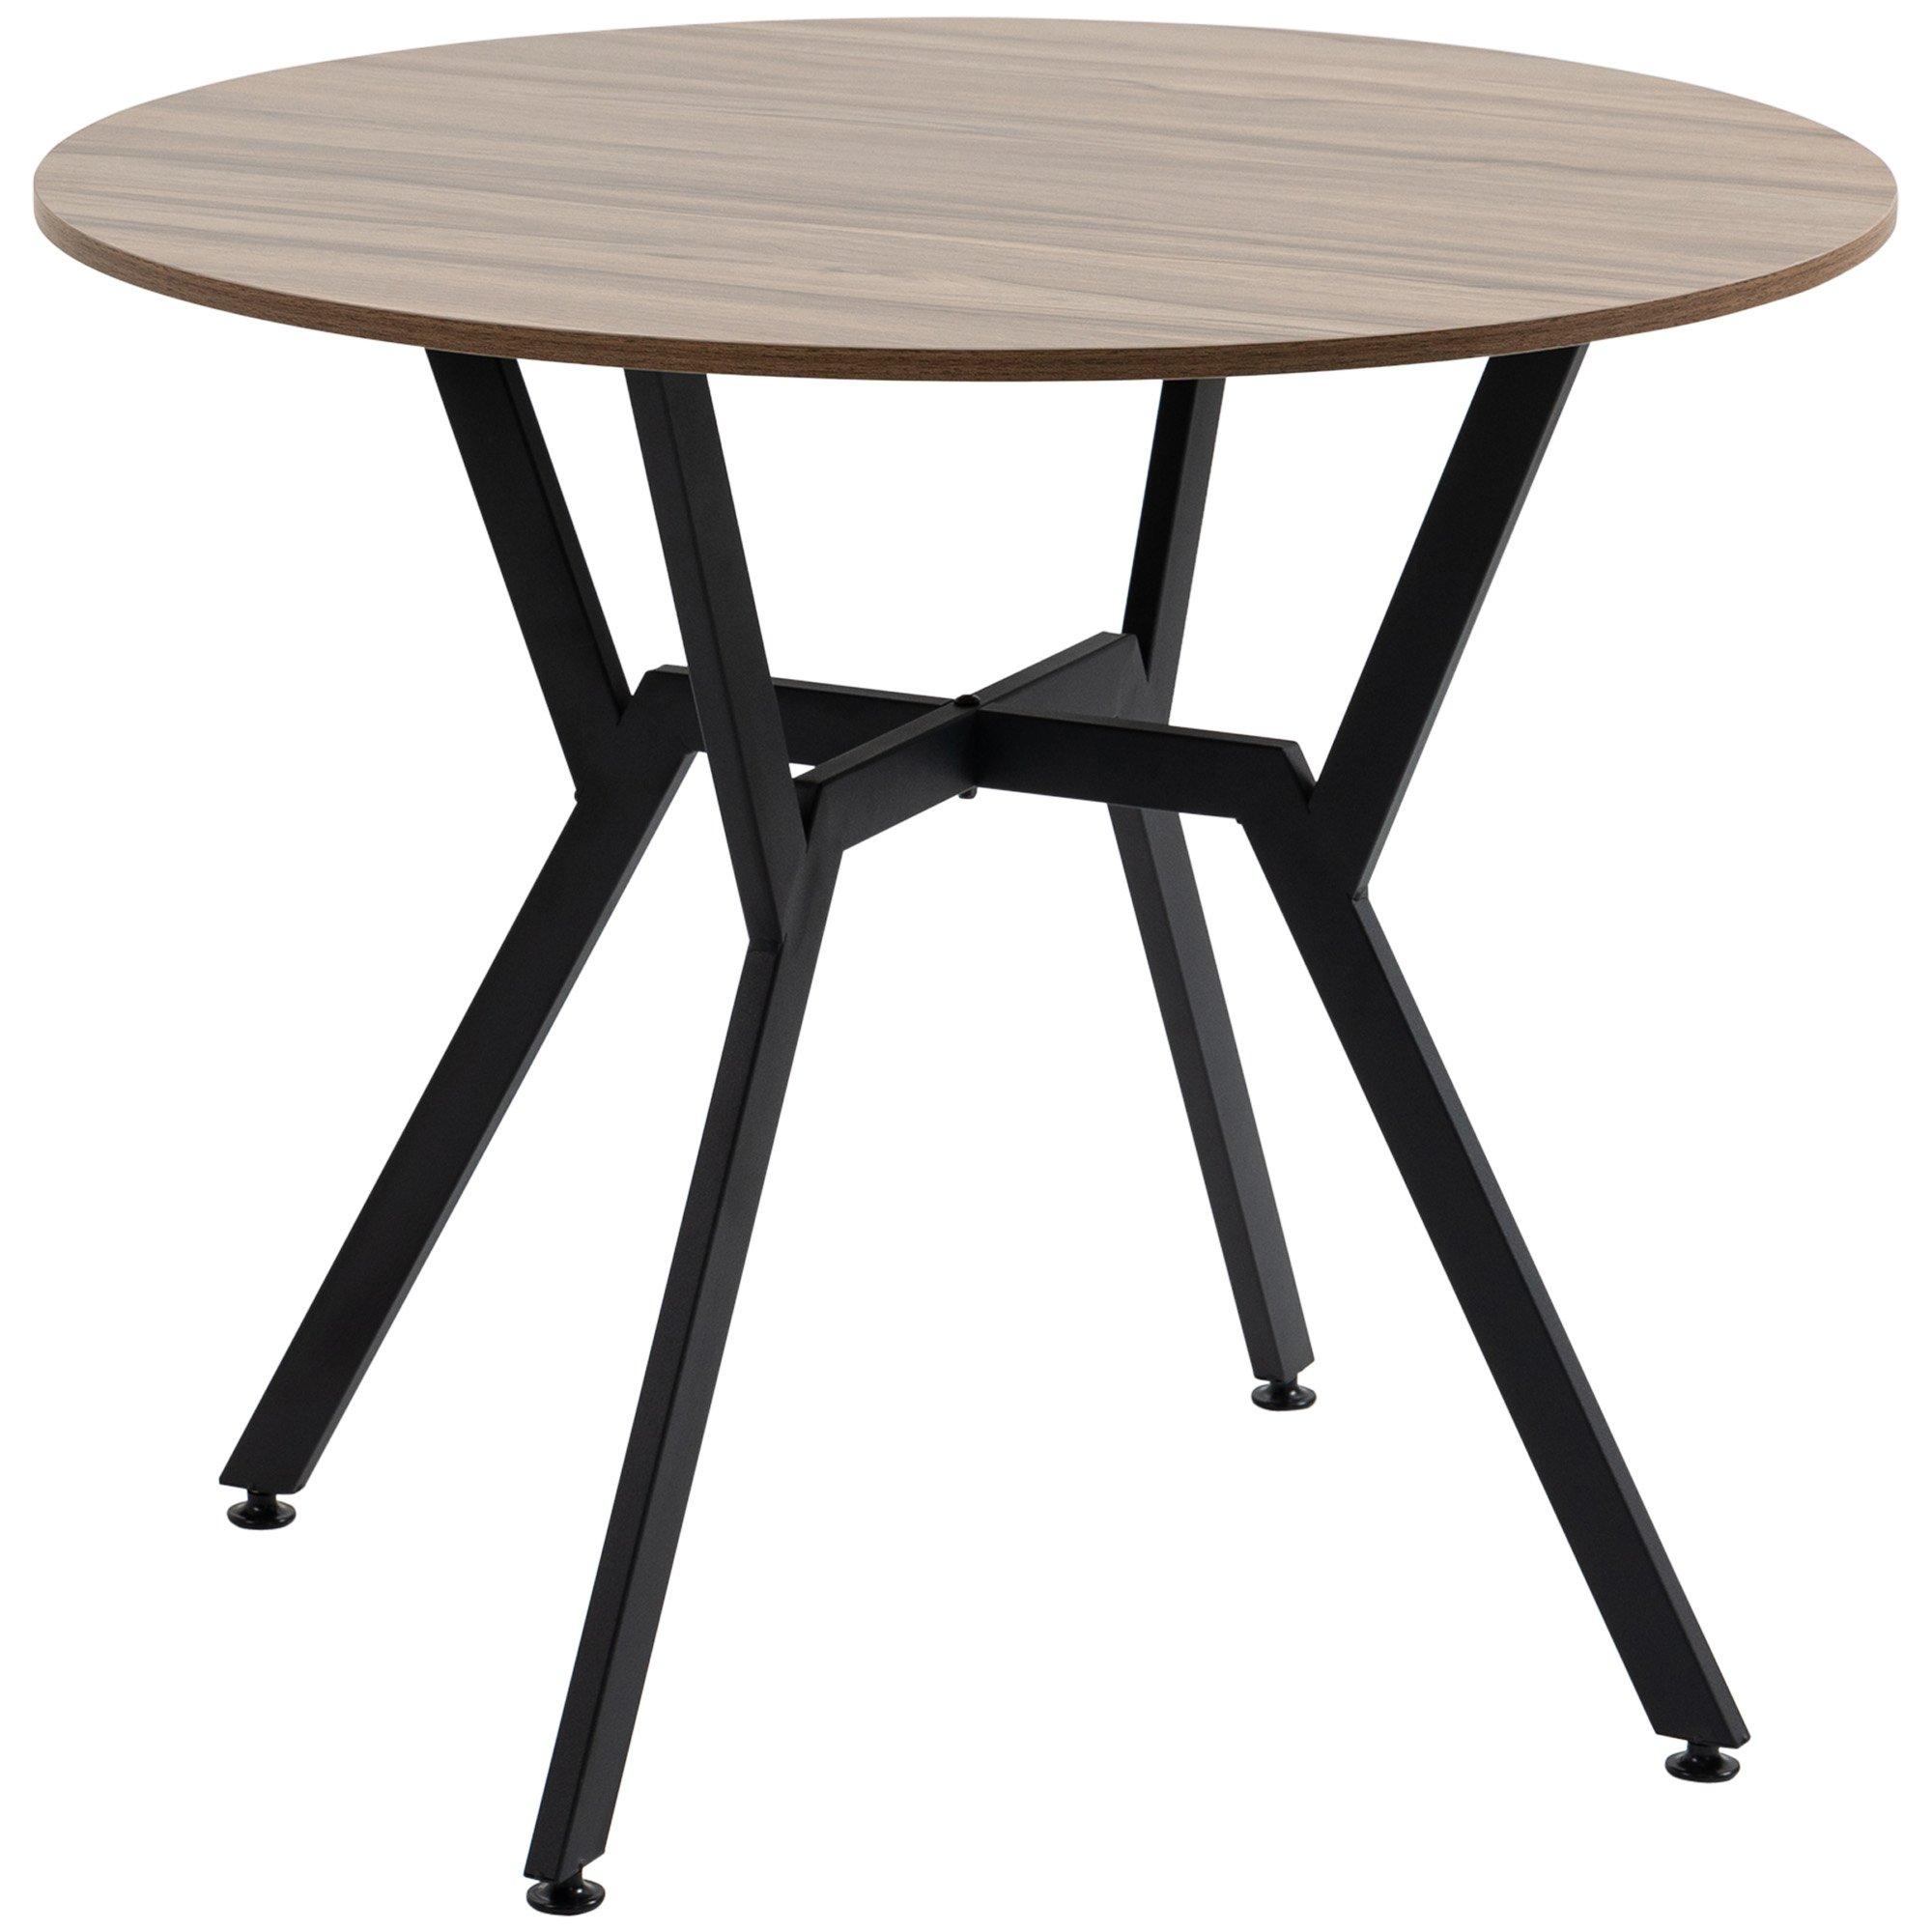 Dining Table with Round Top Steel Legs for Kitchen Dining Room Brown